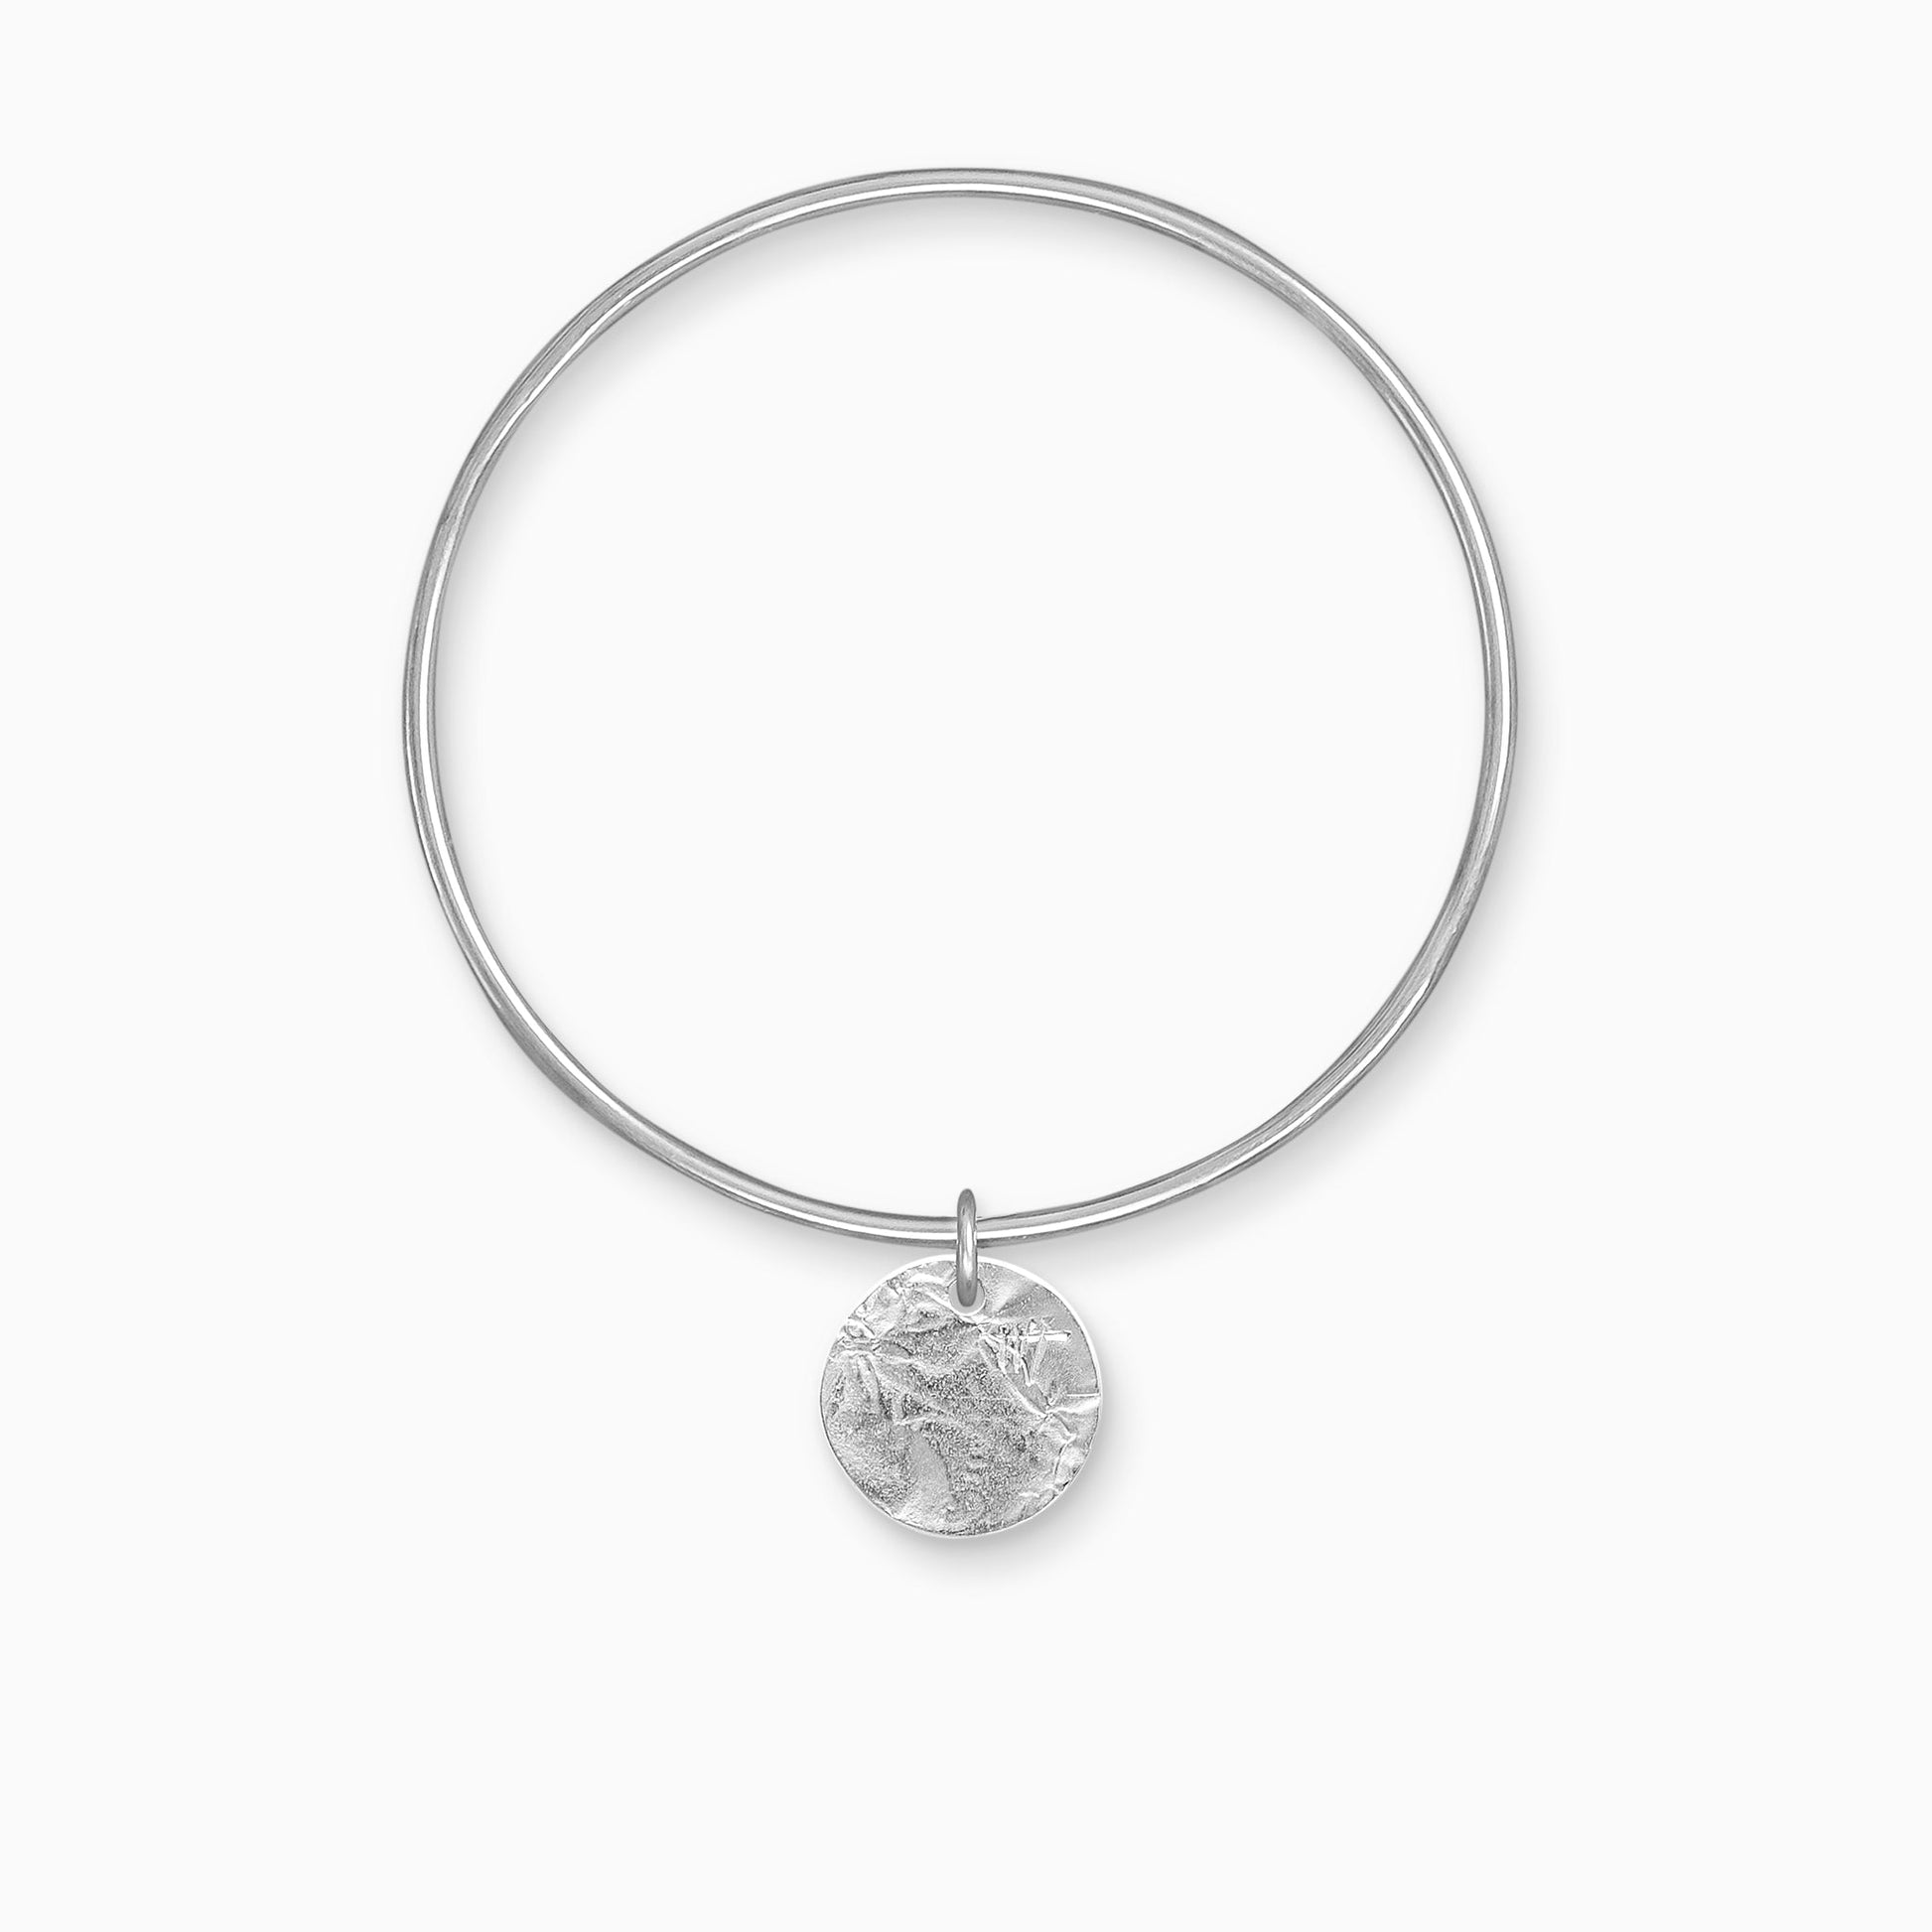 A recycled Silver textured, circular, flat disc charm freely moving on a round wire bangle. Charm 17mm. Bangle 63mm inside diameter x 2mm round wire.